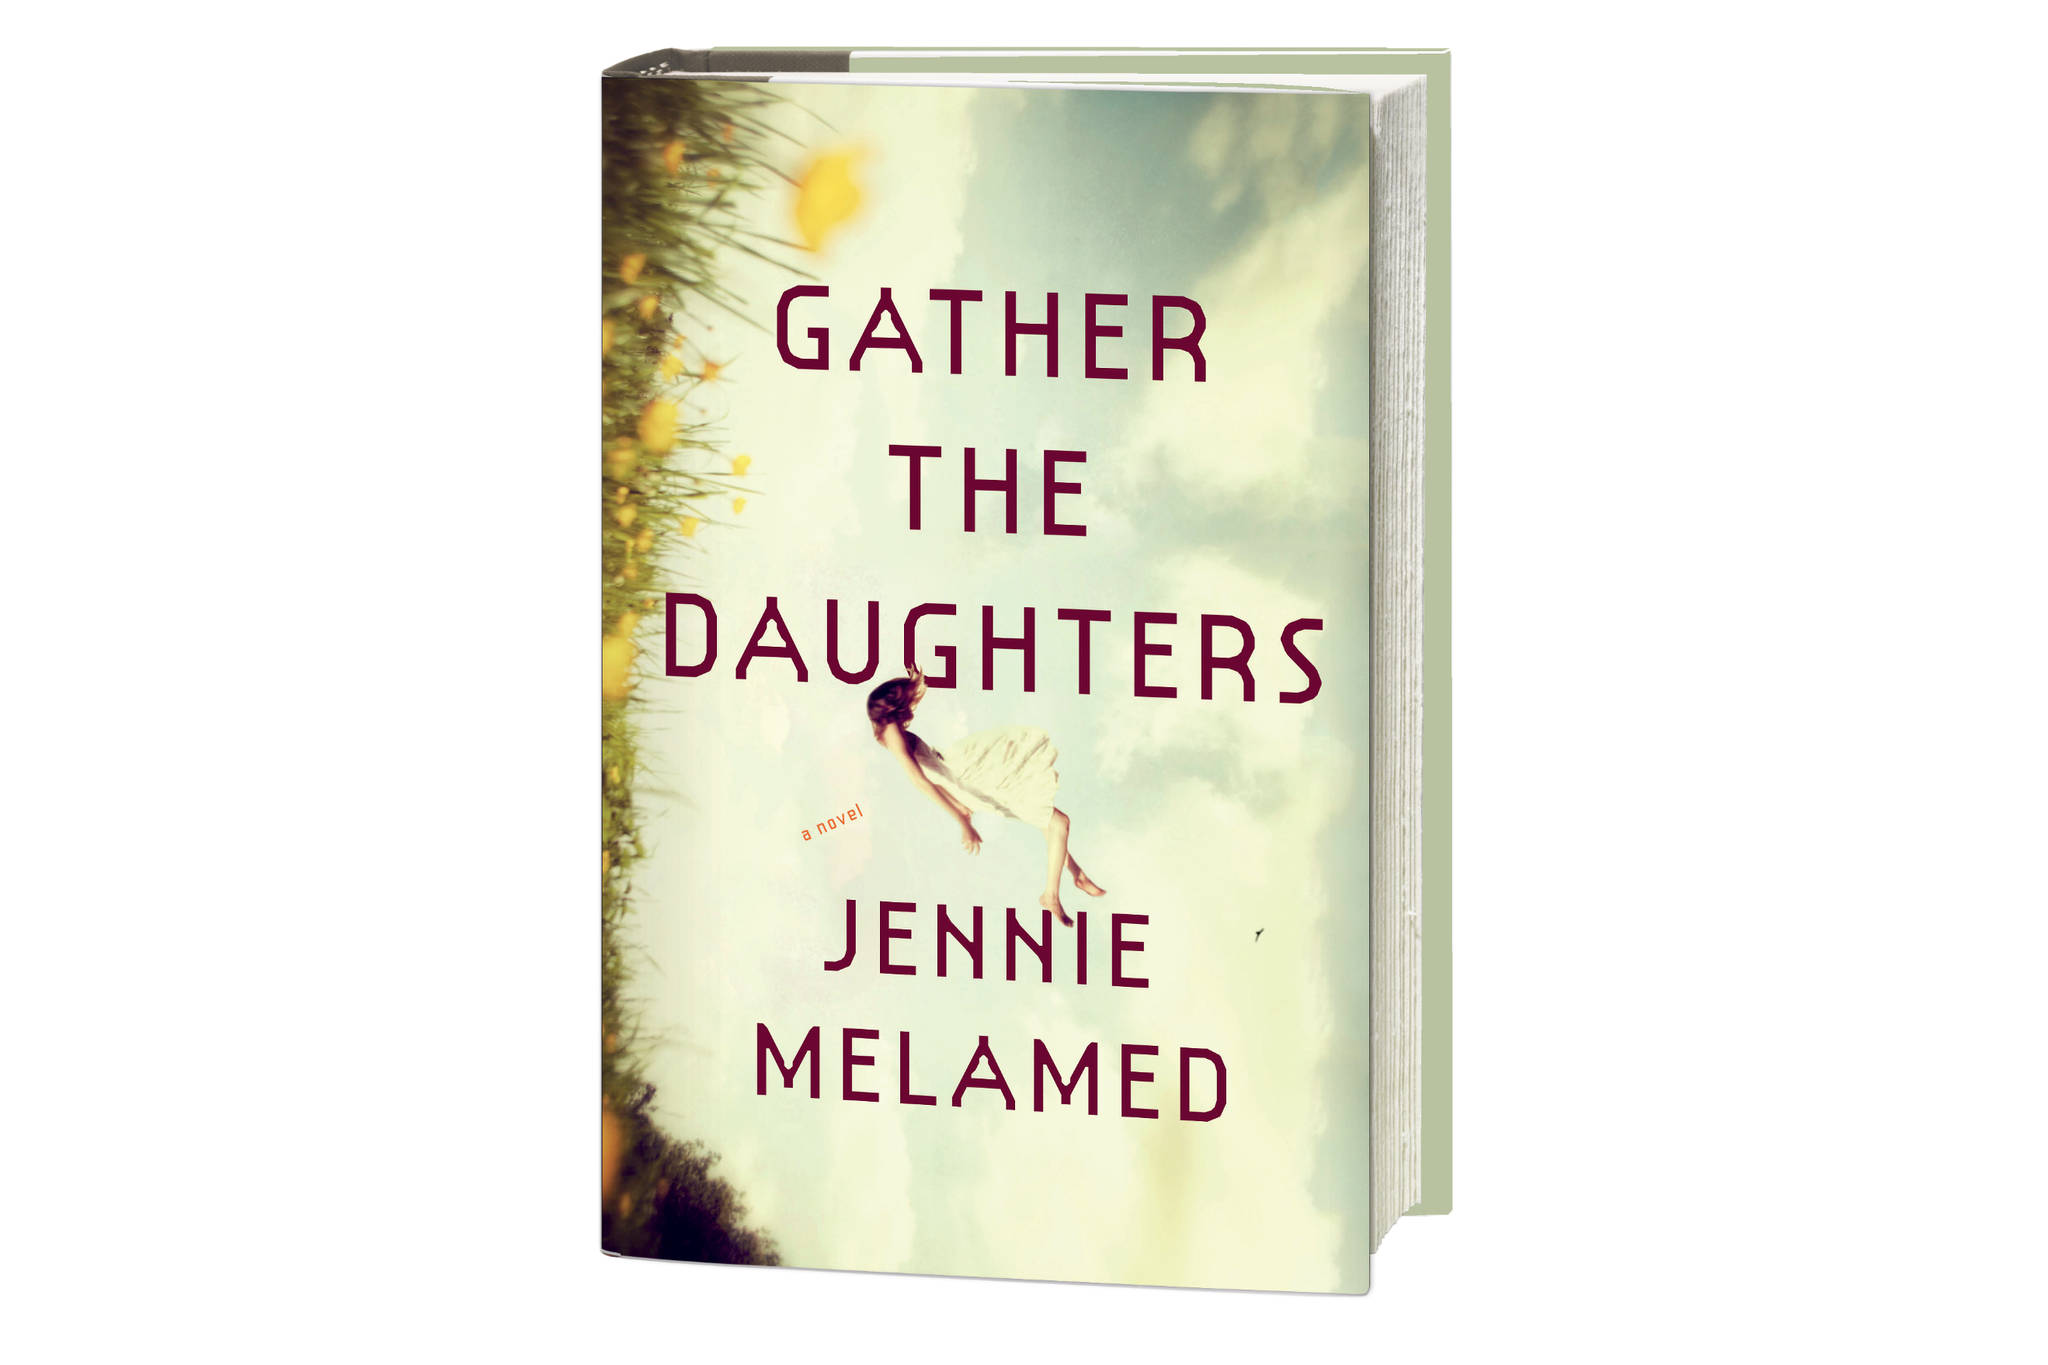 ‘Gather the Daughters’ Is a Dystopian Fiction About Recovering From Abuse